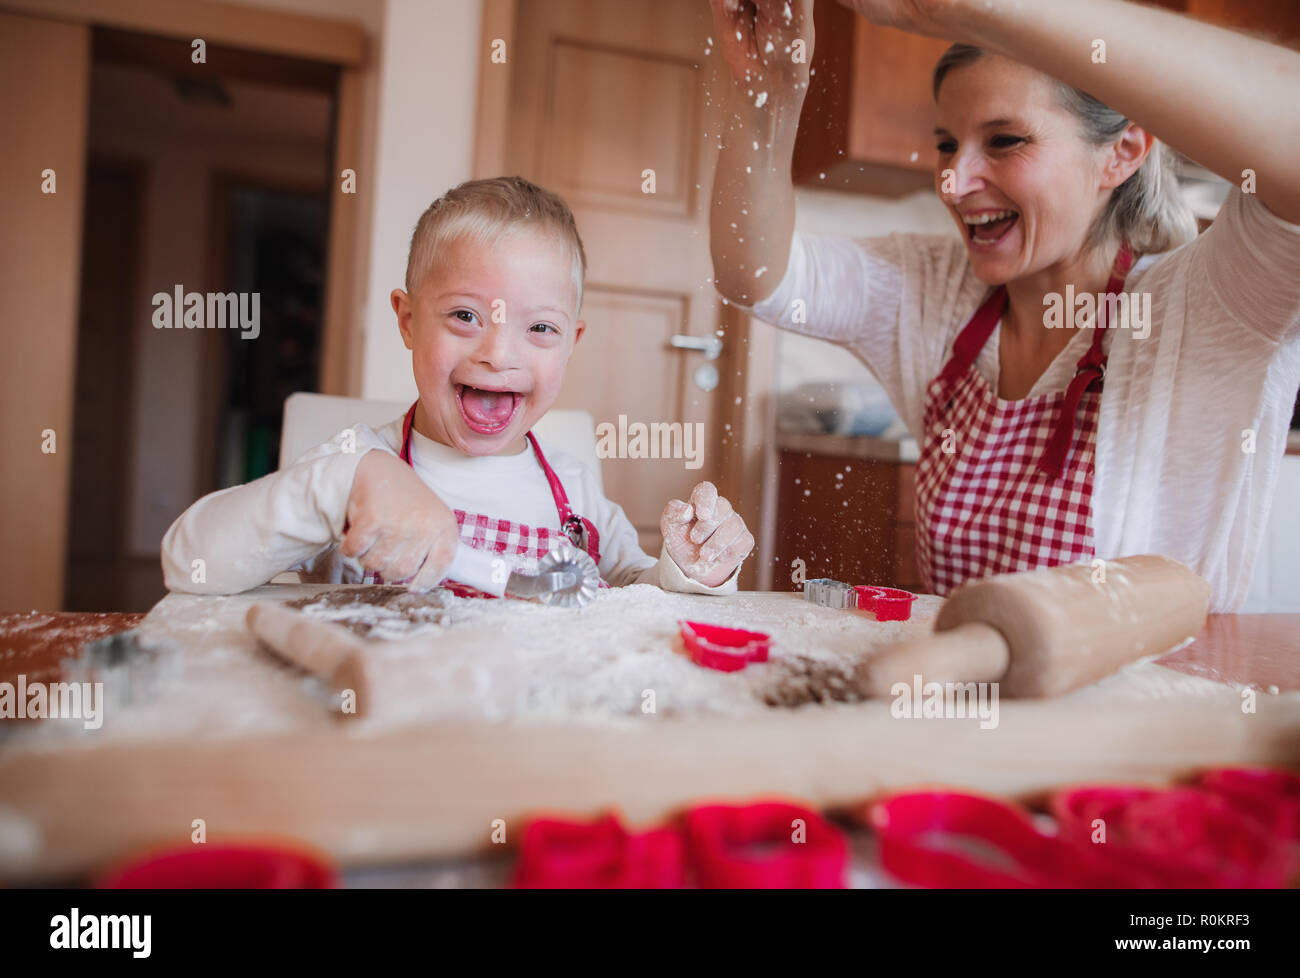 A laughing handicapped down syndrome child with his mother indoors baking. Stock Photo